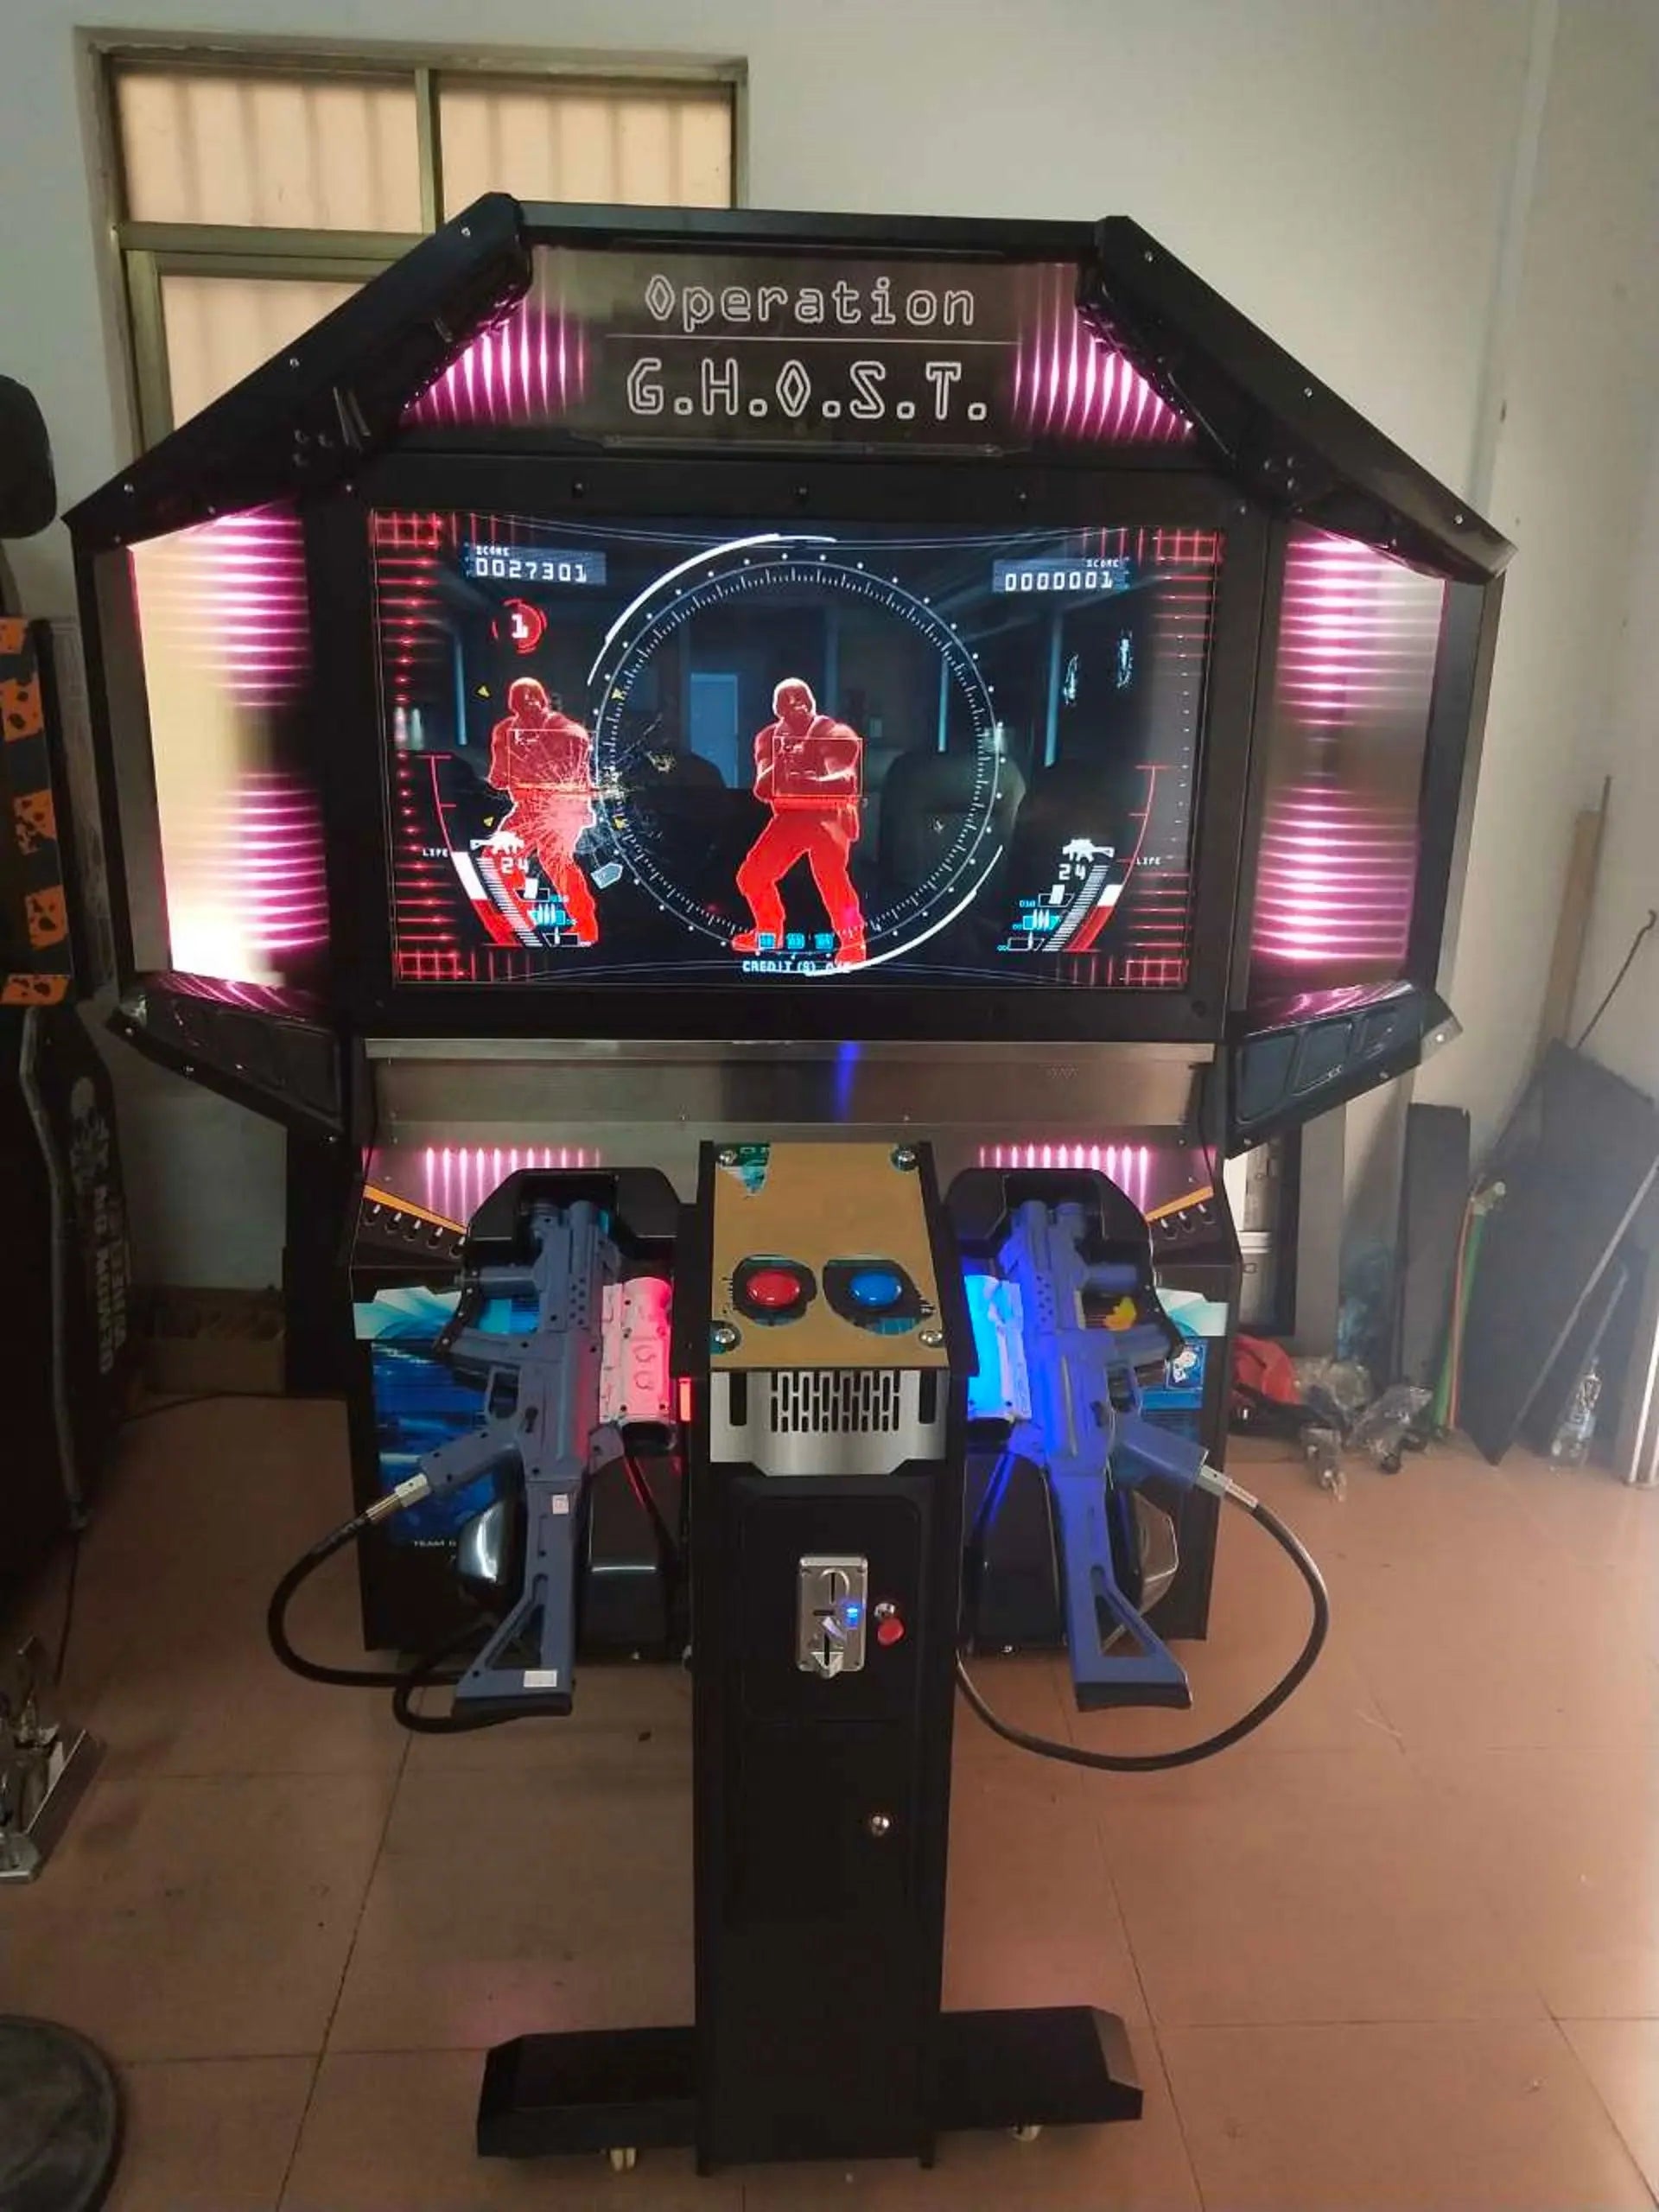 Operation-Ghost-Shoot-Fire-Game-machine-Electric-Coin-Operated-Shooting-Gun-Indoor-Amusement-Arcade-games-Tomy-Arcade